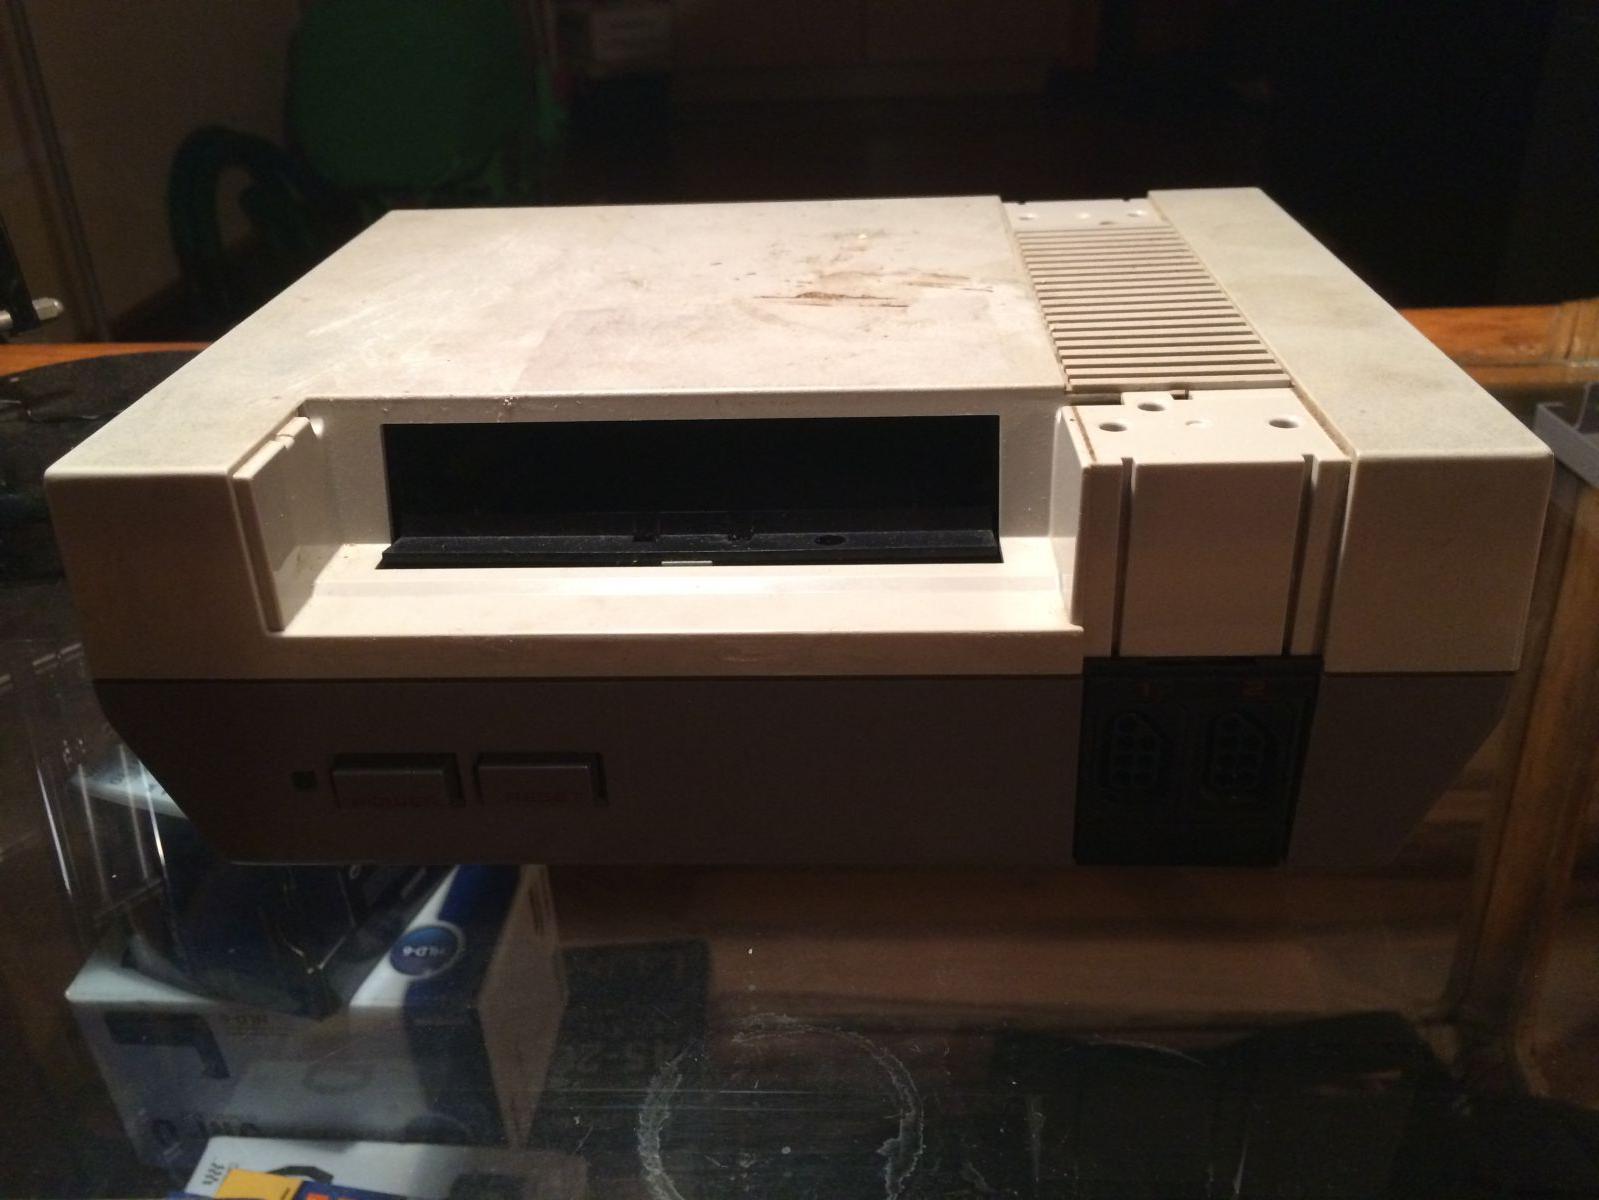 NES Project